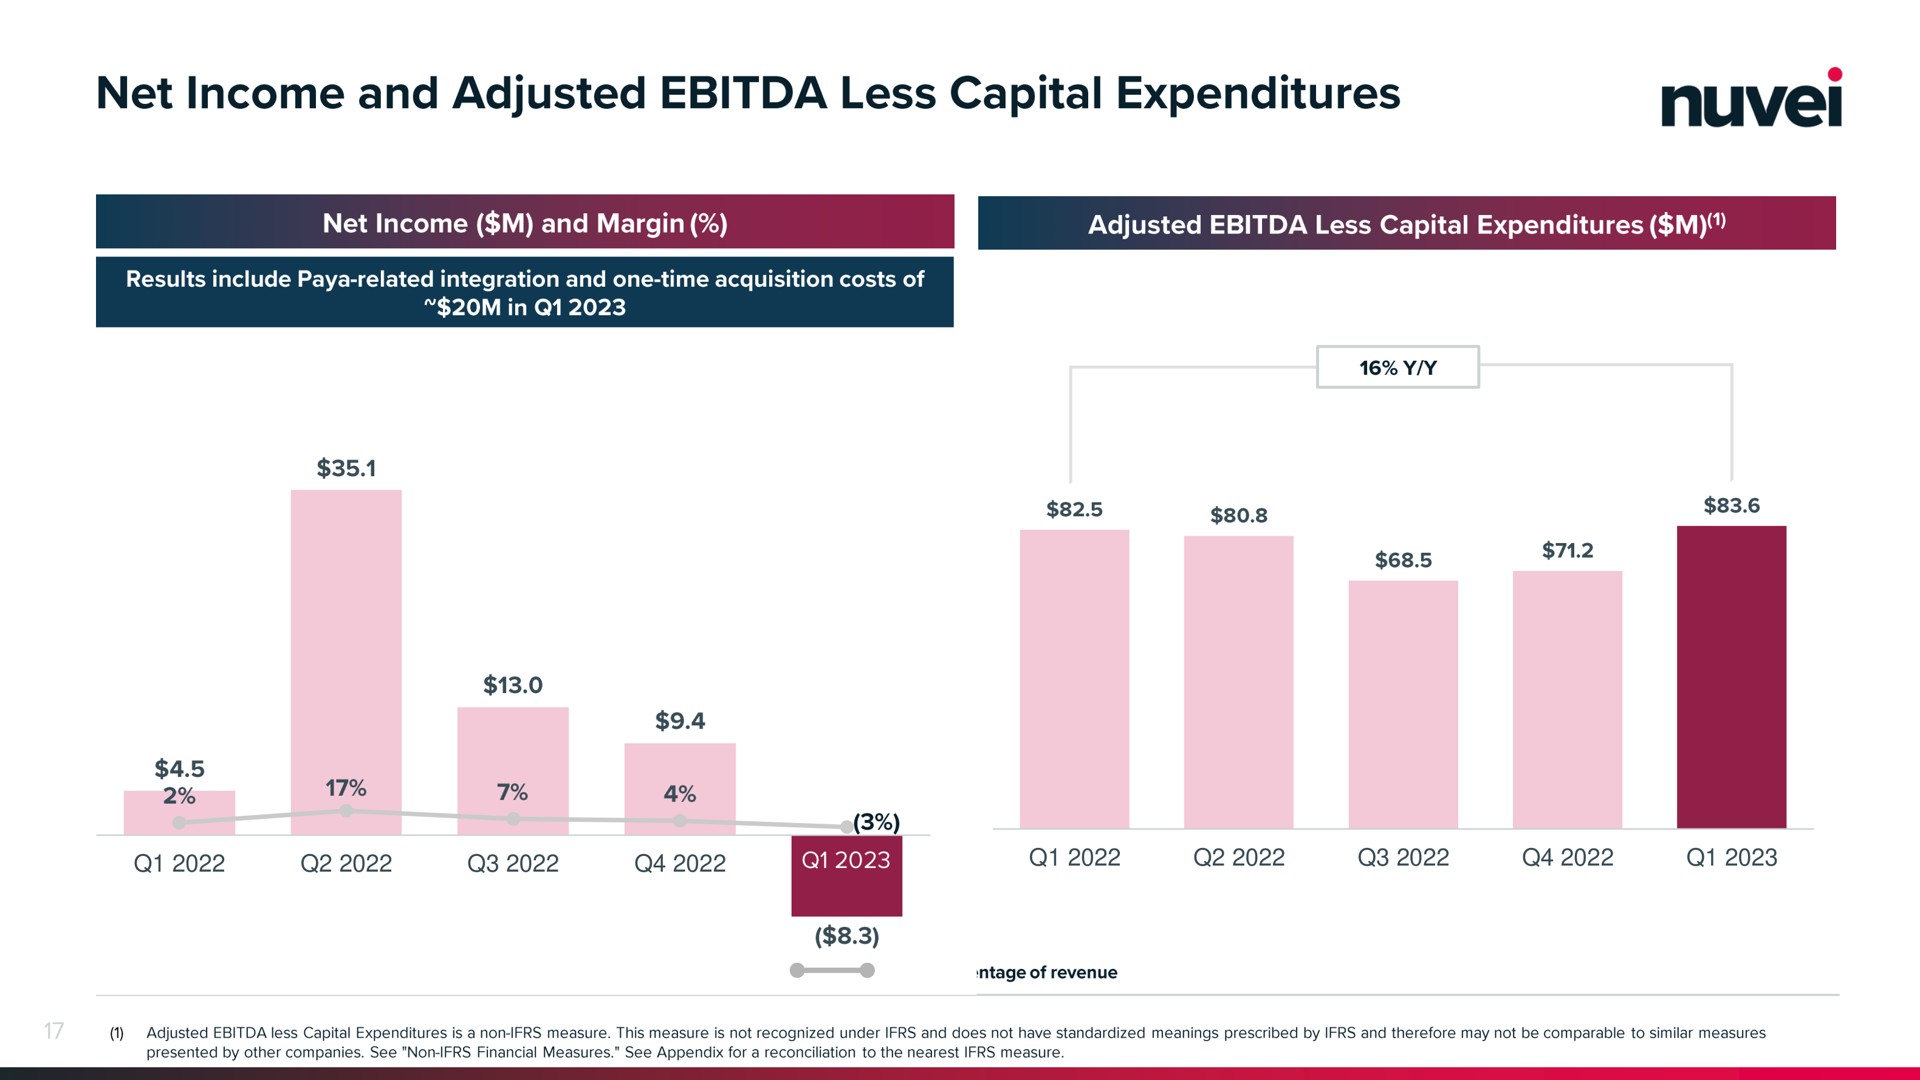 net income and adjusted less capital expenditures | Nuvei